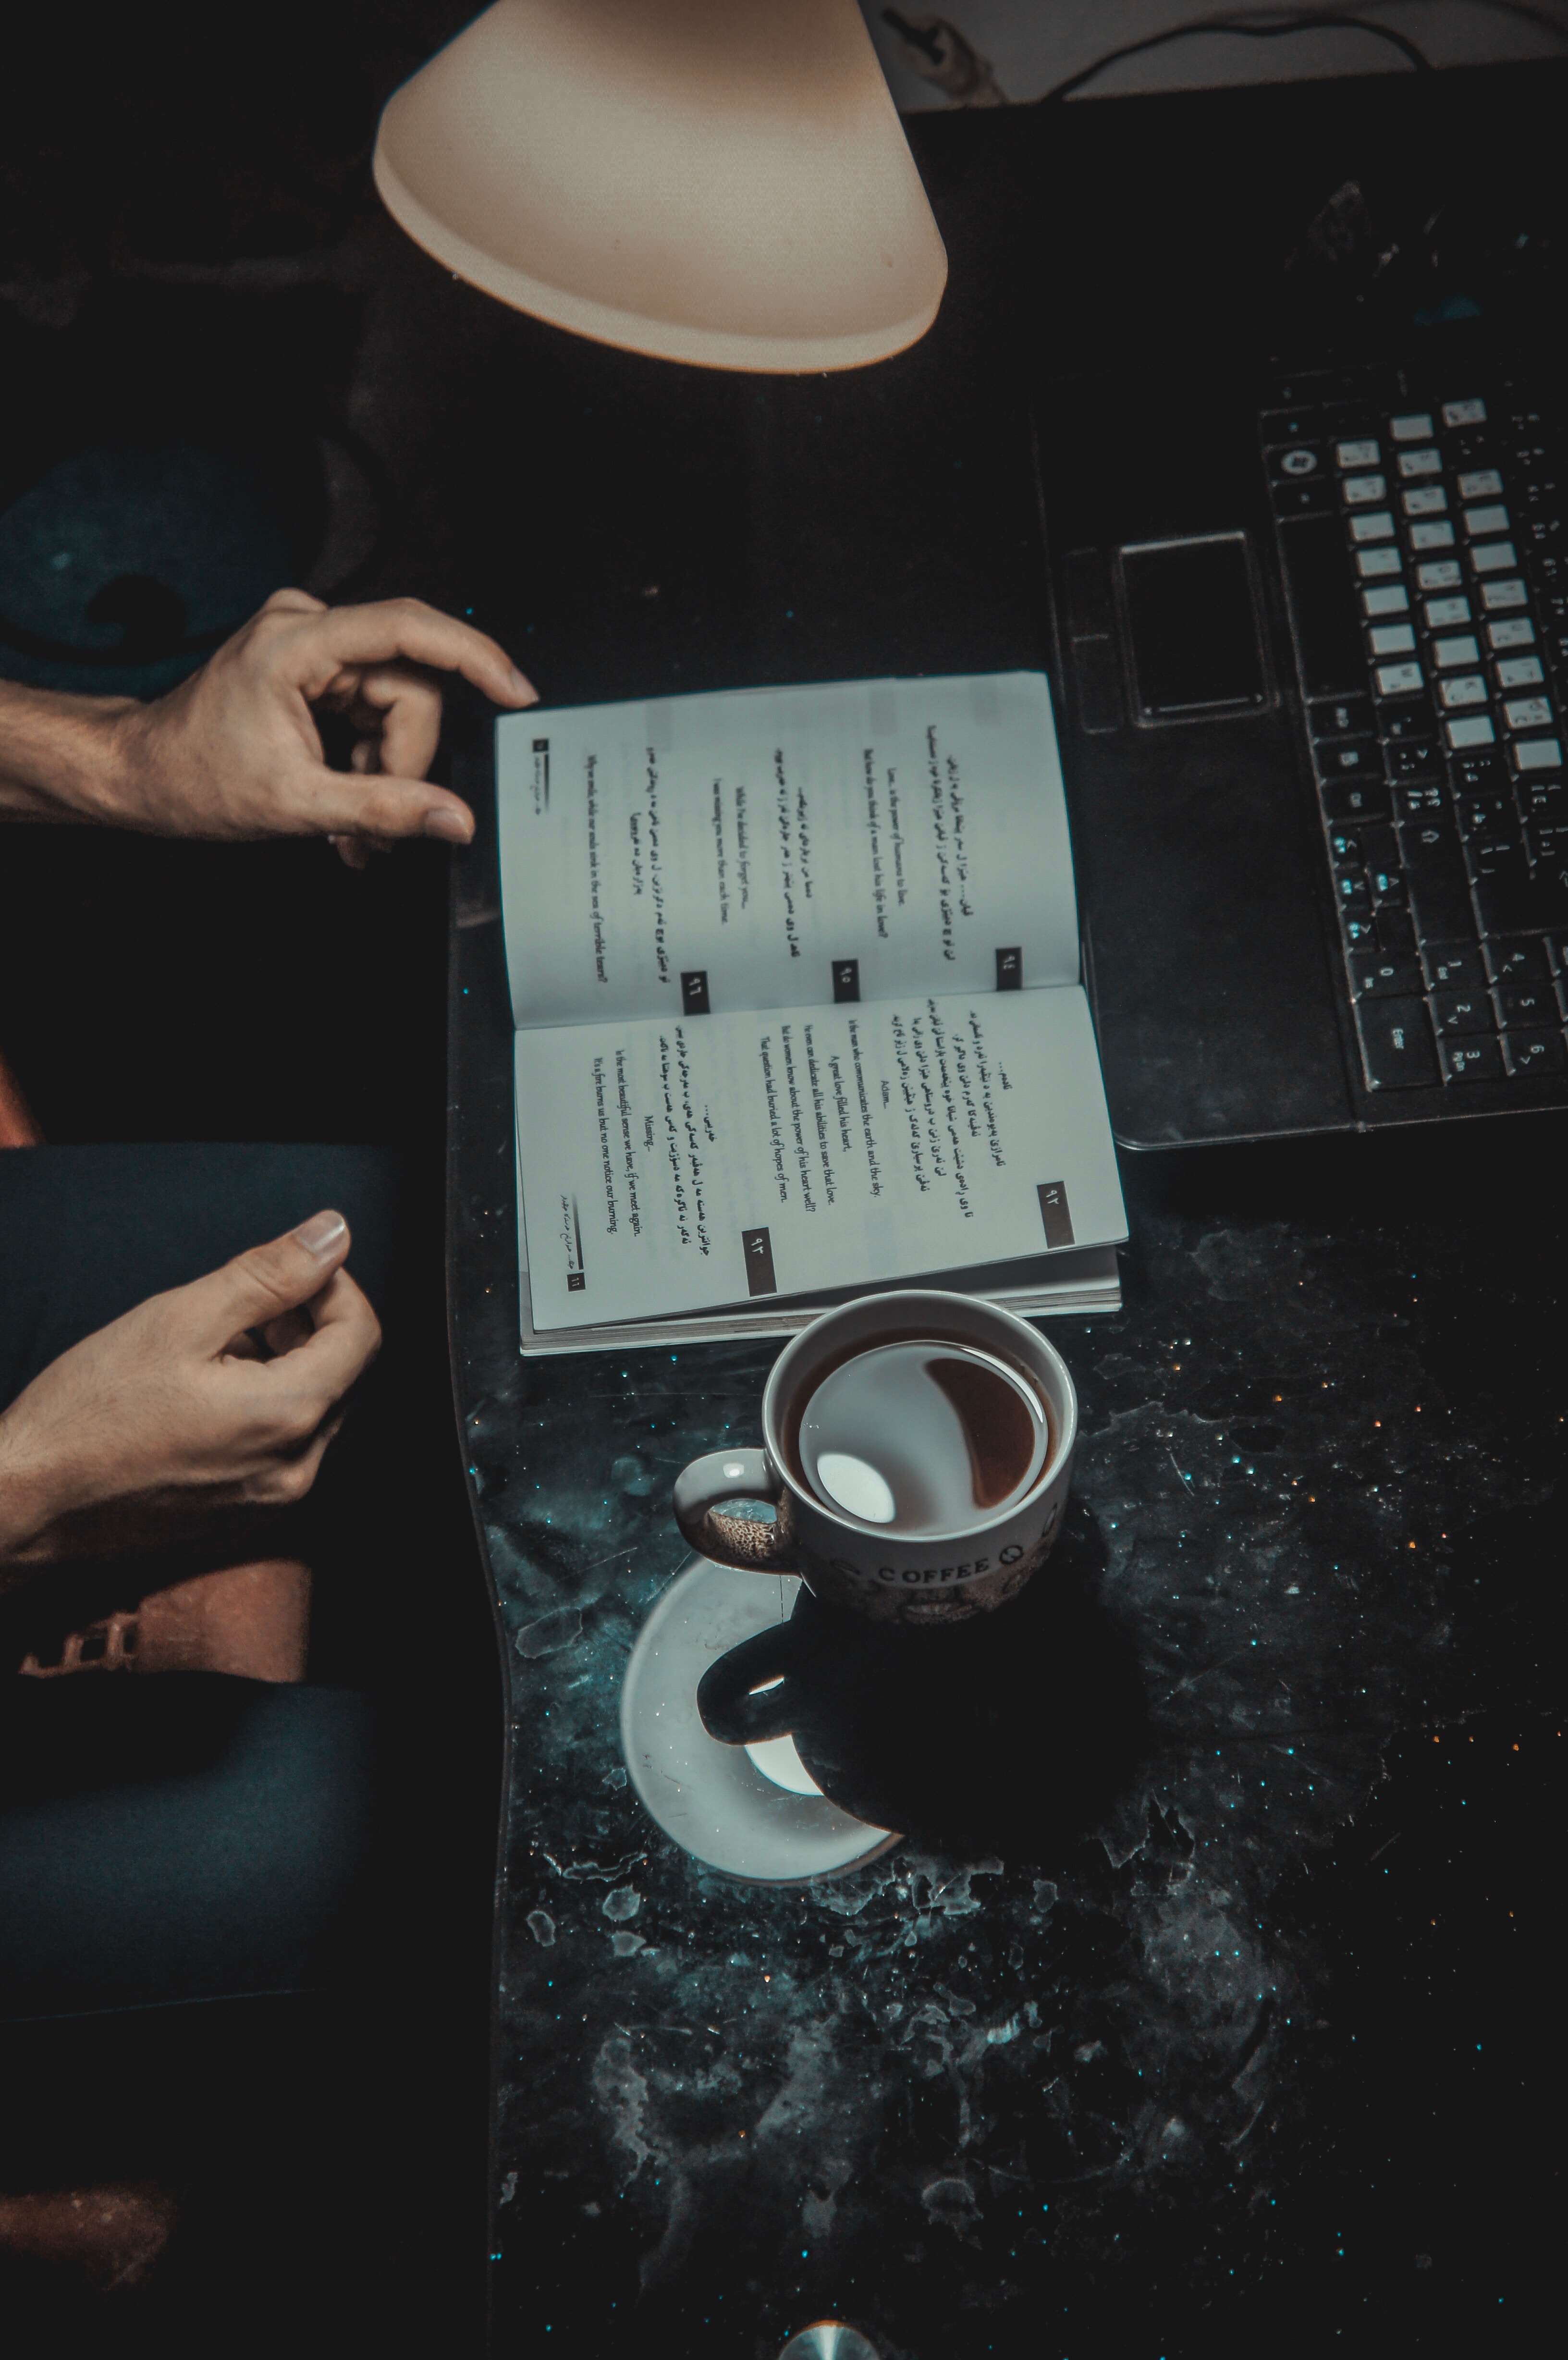 laptop, book, notebook, cup, miscellanea, miscellaneous, hands, mood Full HD